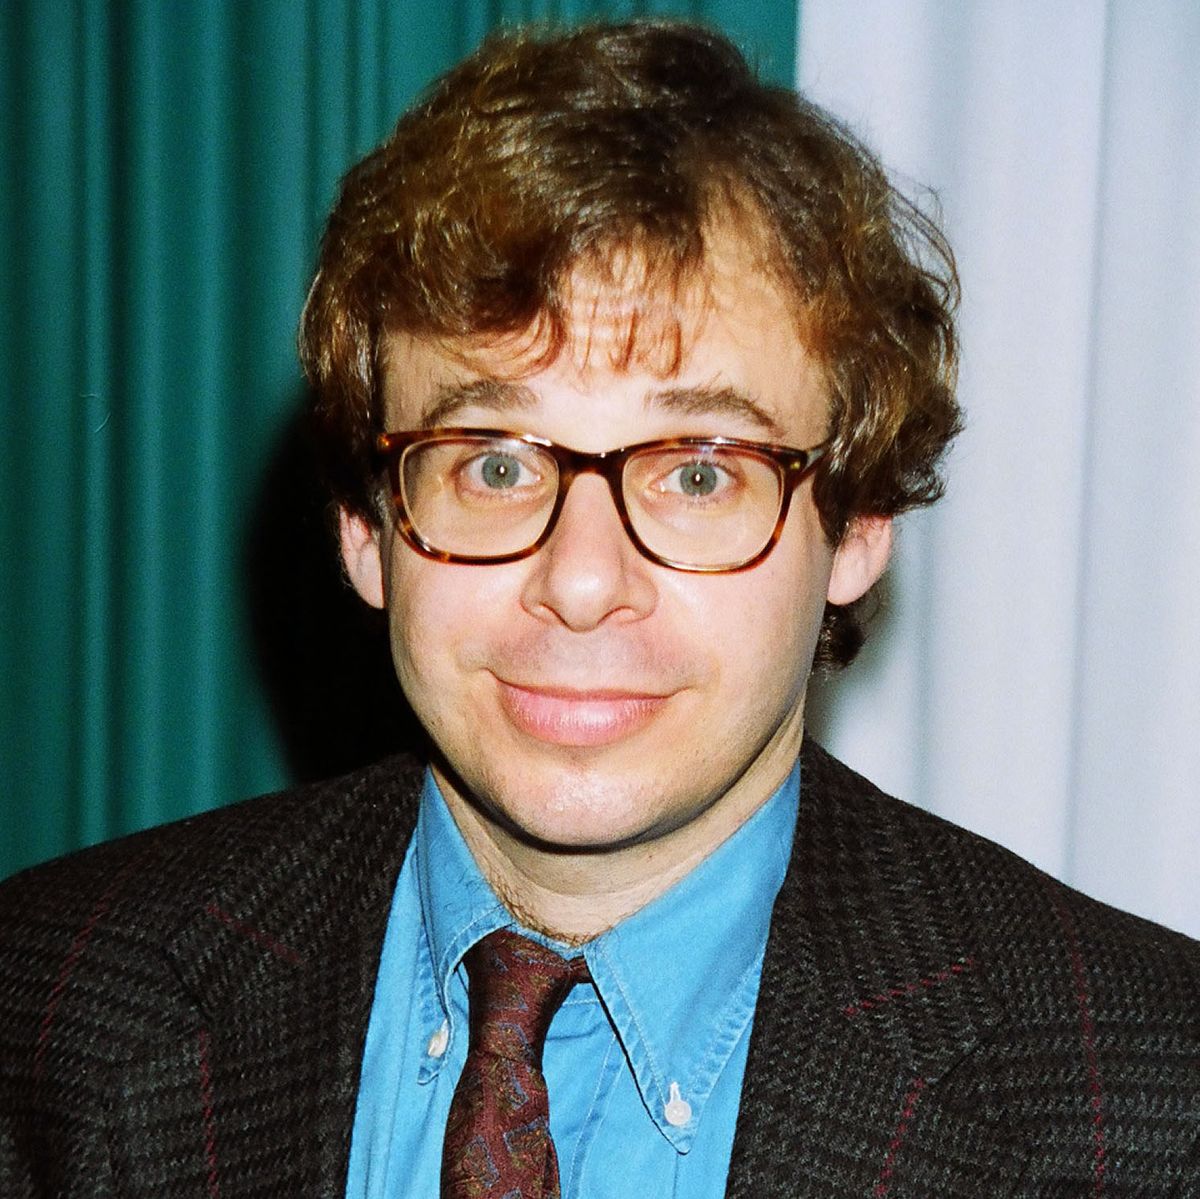 Video RICK MORANIS PUNCHED IN UNPROVOKED ATTACK SofaKingCool